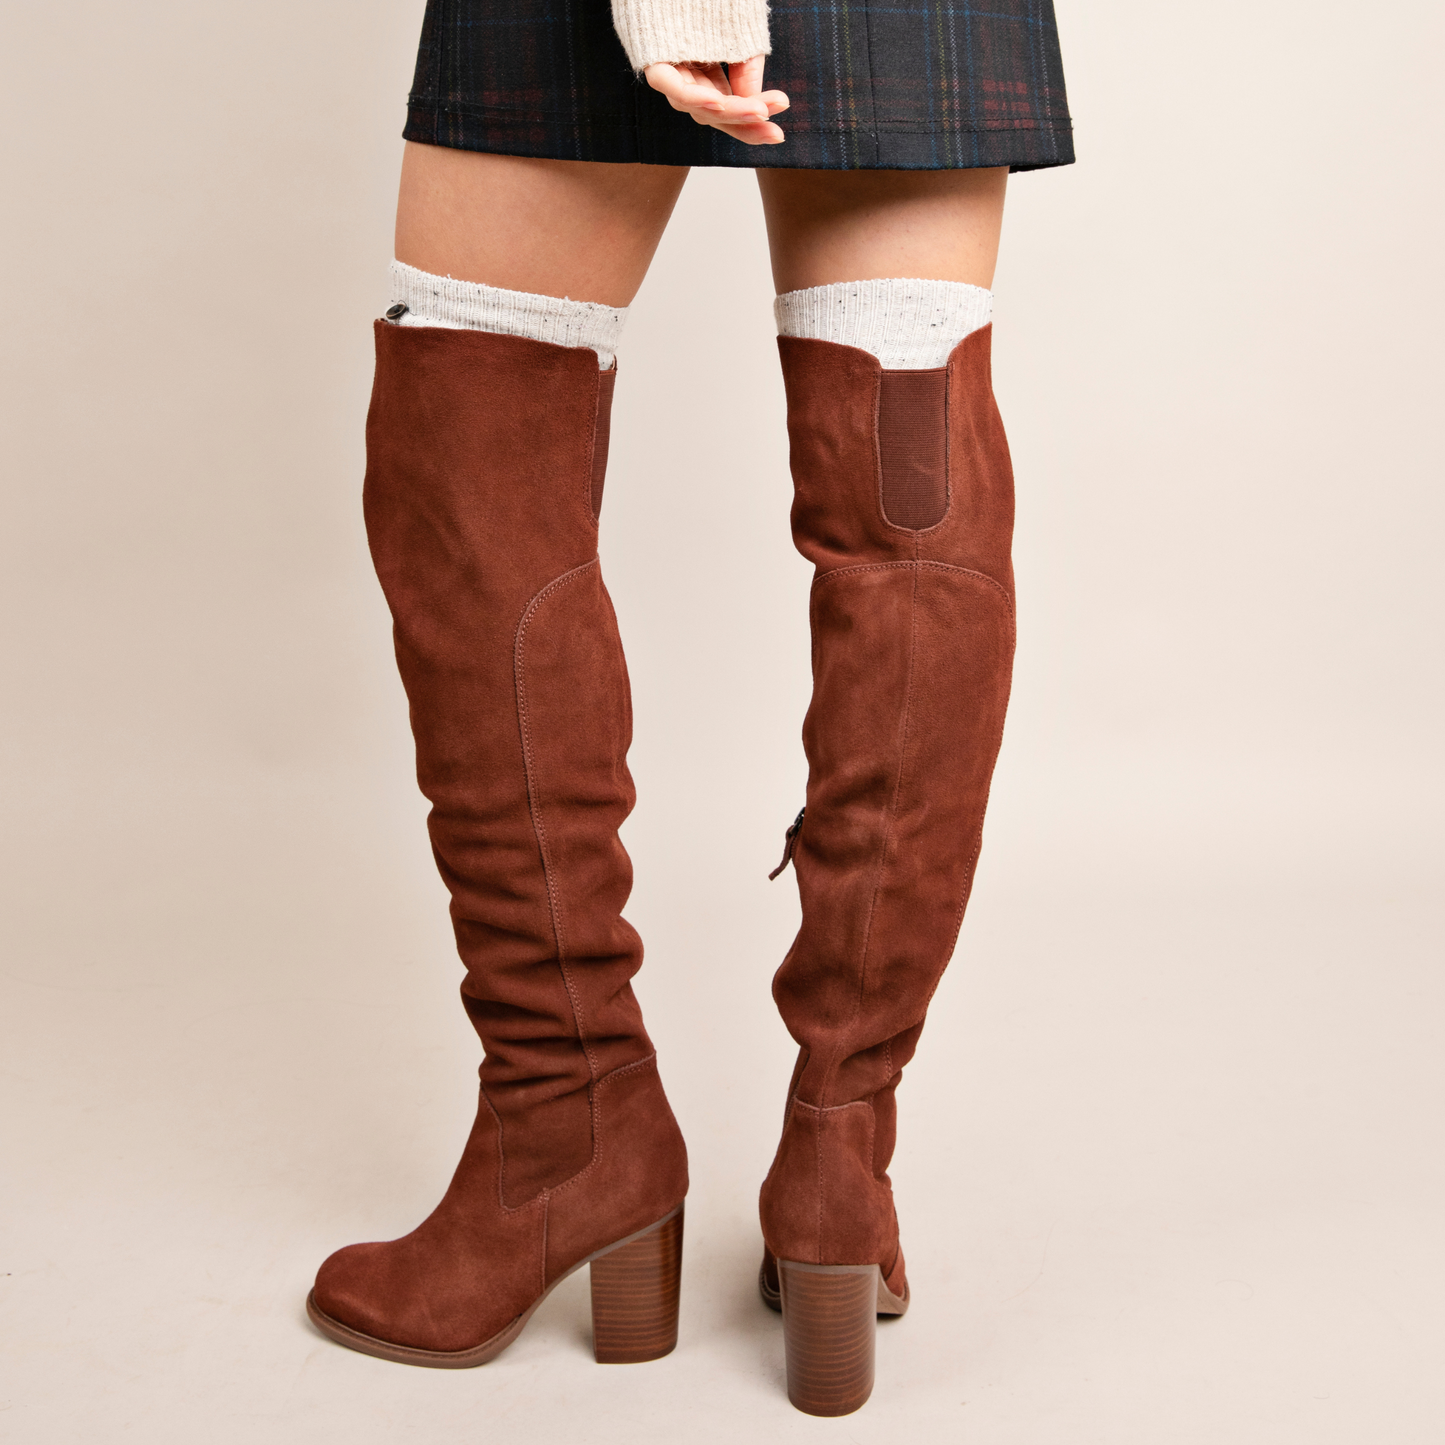 Logan Coffee Over The Knee Boot from Kelsi Dagger BK - A stylish and versatile boot for a trendy look.